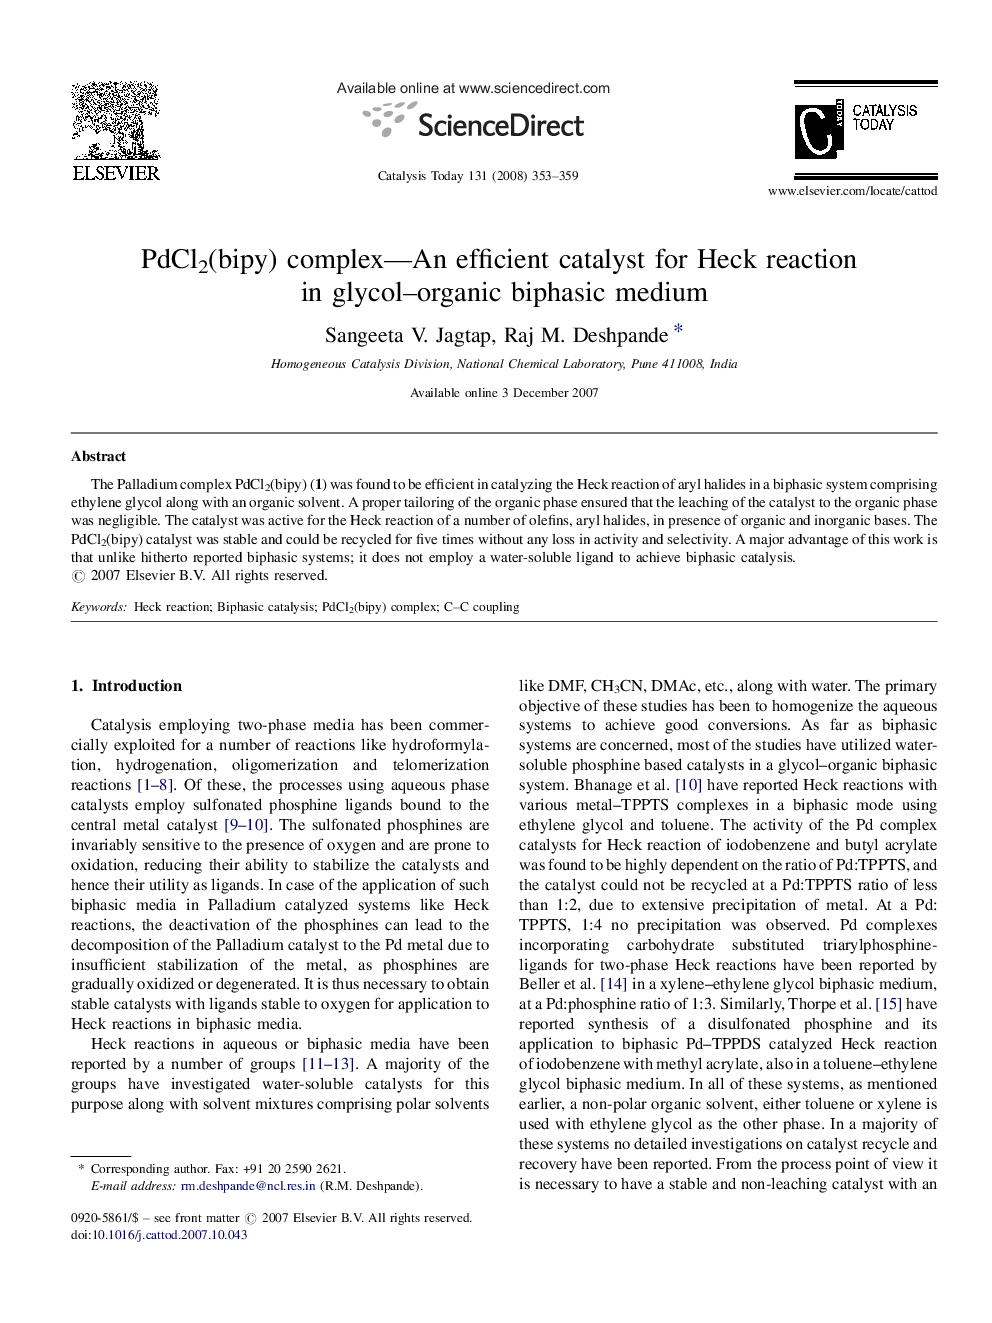 PdCl2(bipy) complex—An efficient catalyst for Heck reaction in glycol–organic biphasic medium